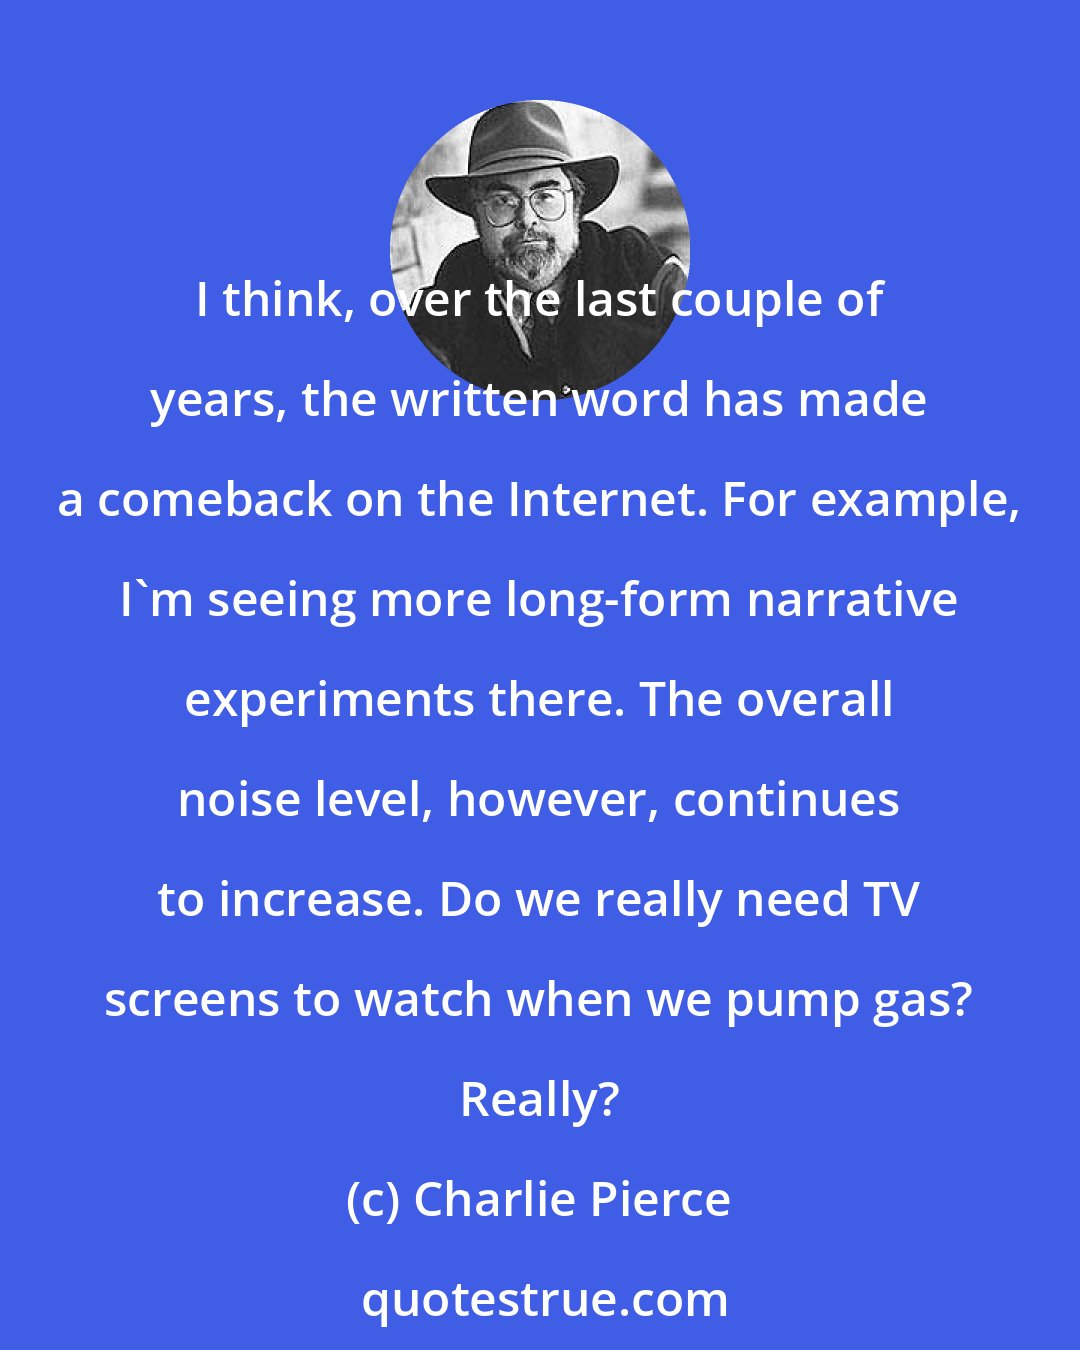 Charlie Pierce: I think, over the last couple of years, the written word has made a comeback on the Internet. For example, I'm seeing more long-form narrative experiments there. The overall noise level, however, continues to increase. Do we really need TV screens to watch when we pump gas? Really?